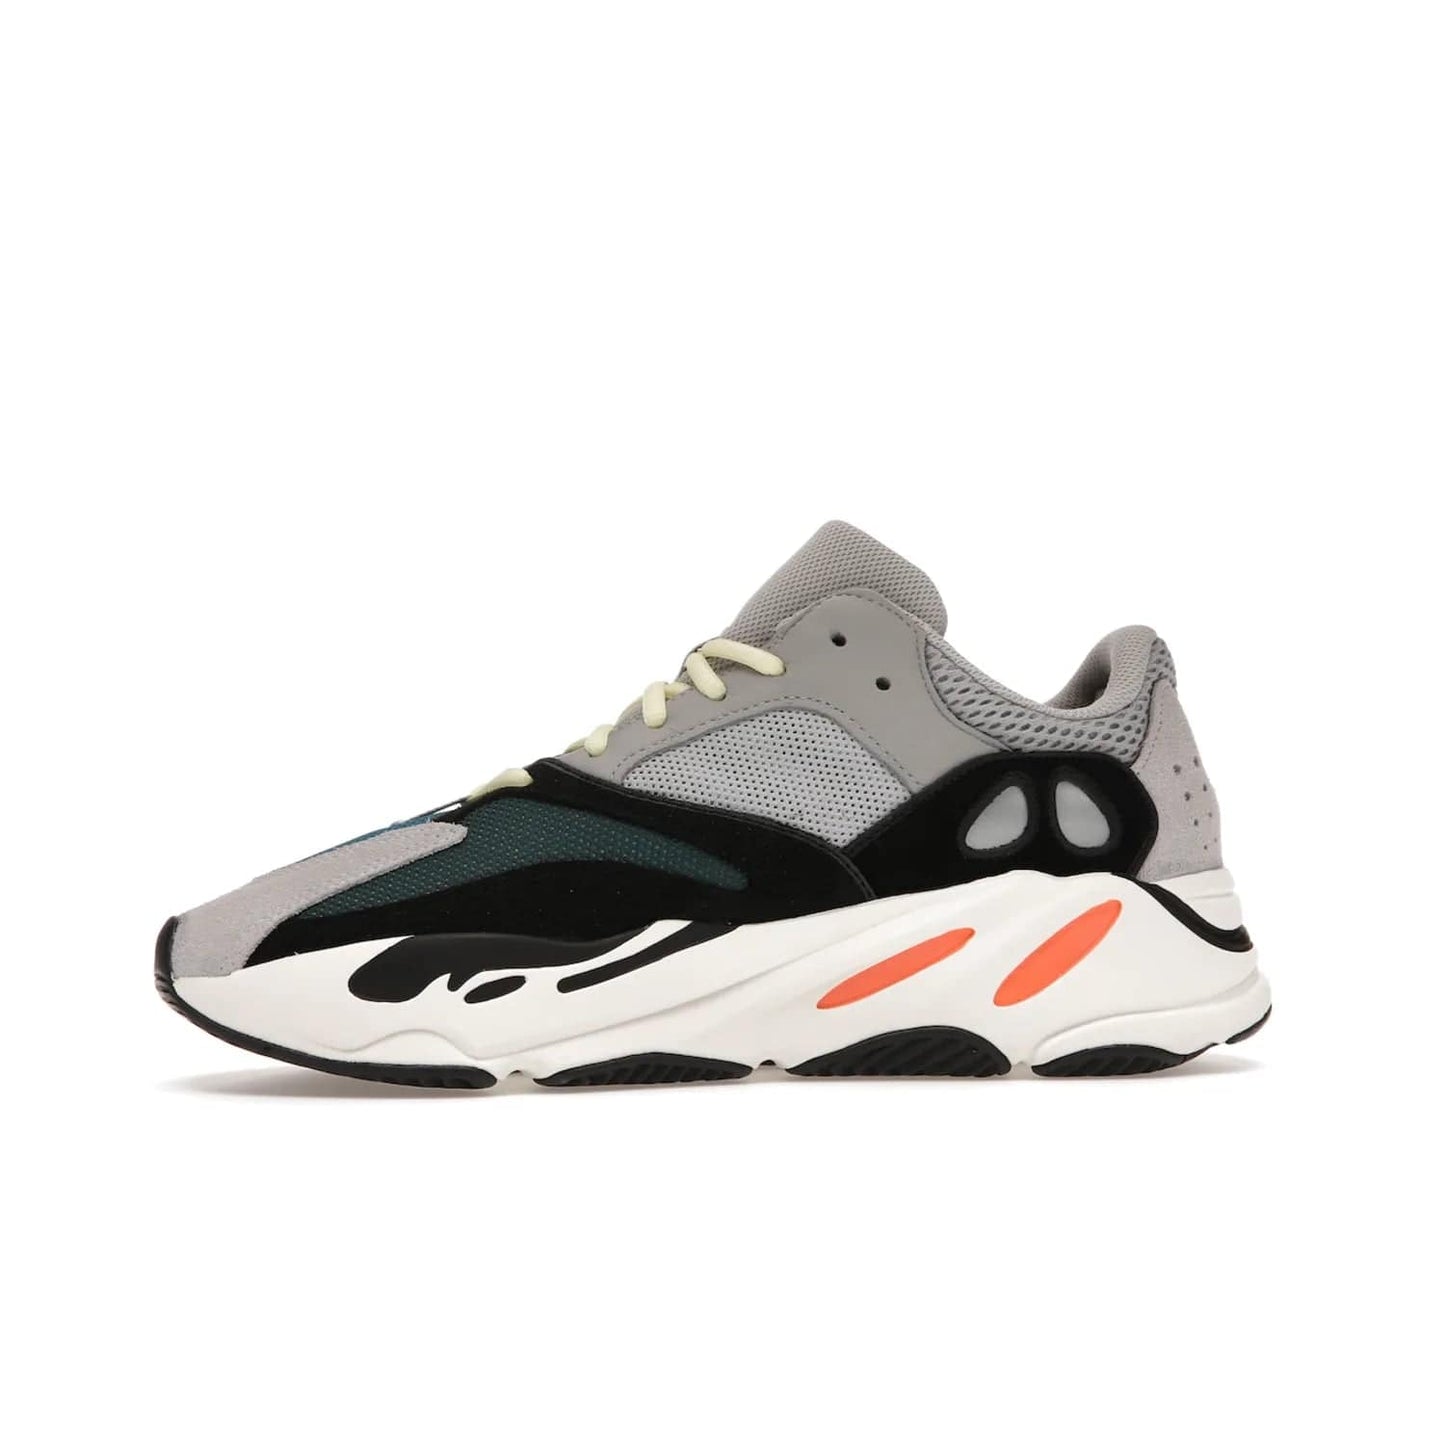 adidas Yeezy Boost 700 Wave Runner - Image 18 - Only at www.BallersClubKickz.com - Shop the iconic adidas Yeezy Boost 700 Wave Runner. Featuring grey mesh and leather upper, black suede overlays, teal mesh underlays, and signature Boost sole. Be bold & make a statement.